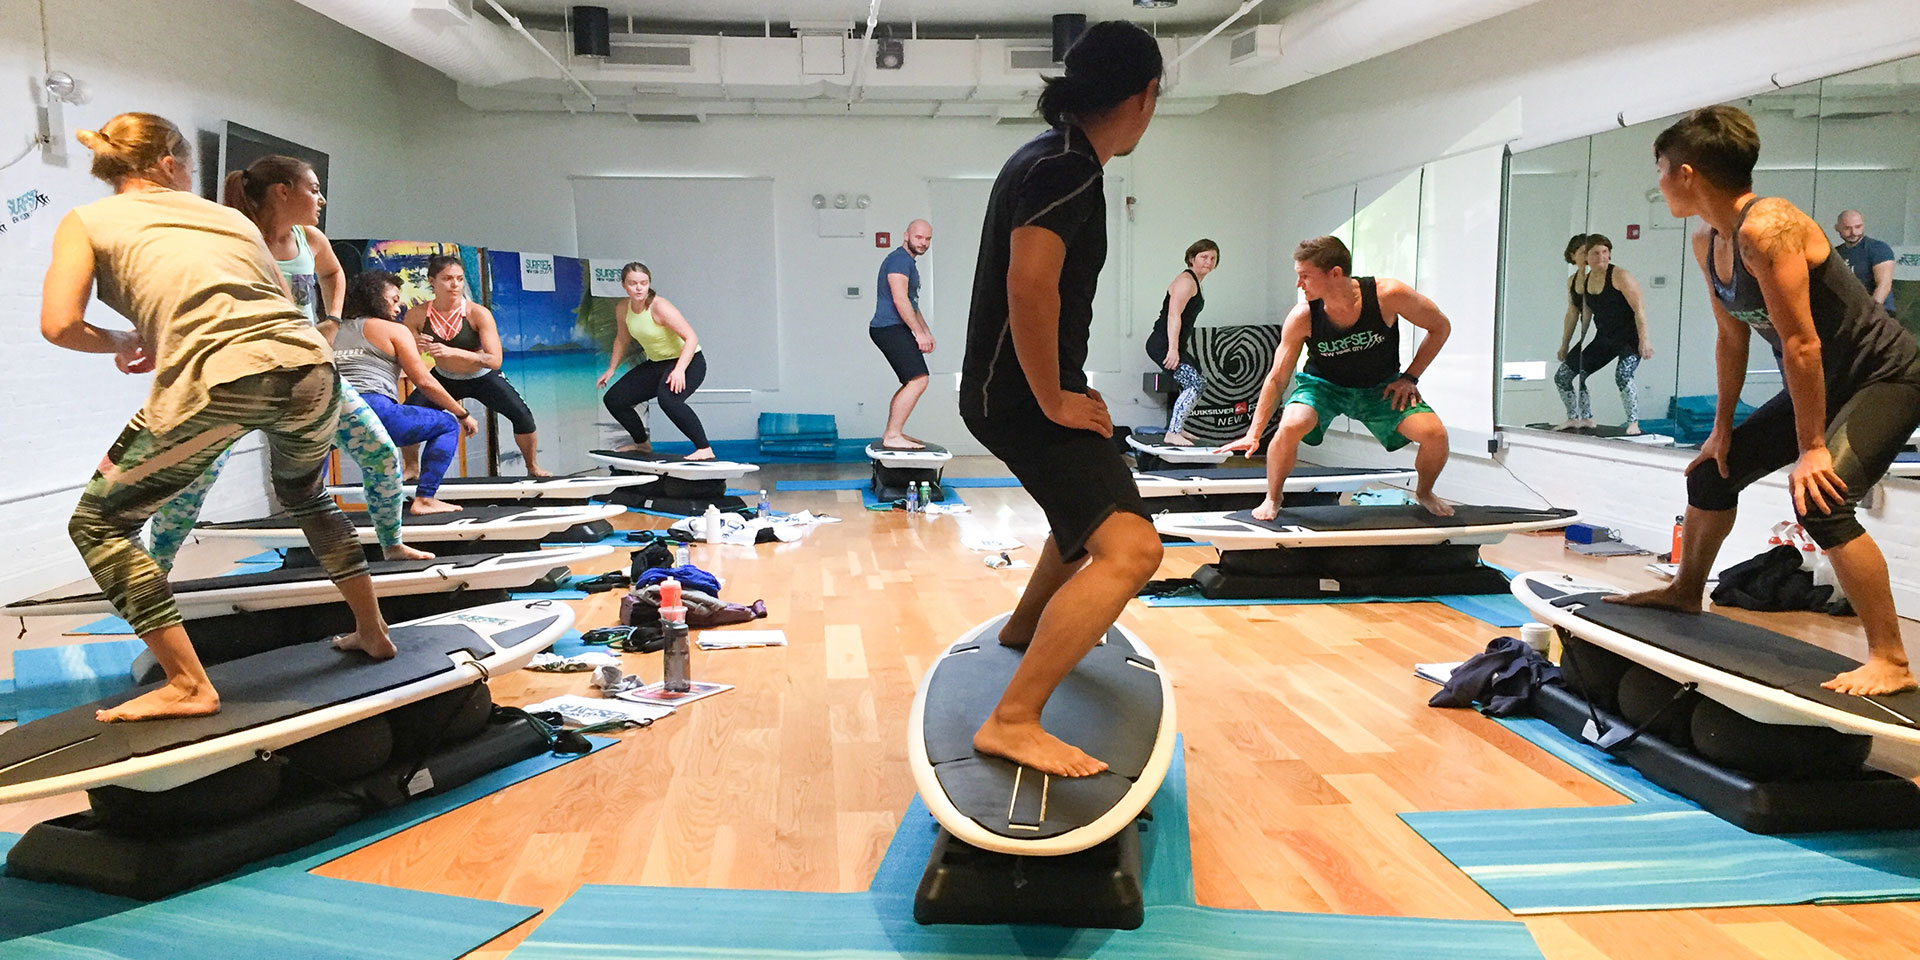 5 Unique NYC Fitness Classes to Join When You’re in the Big Apple